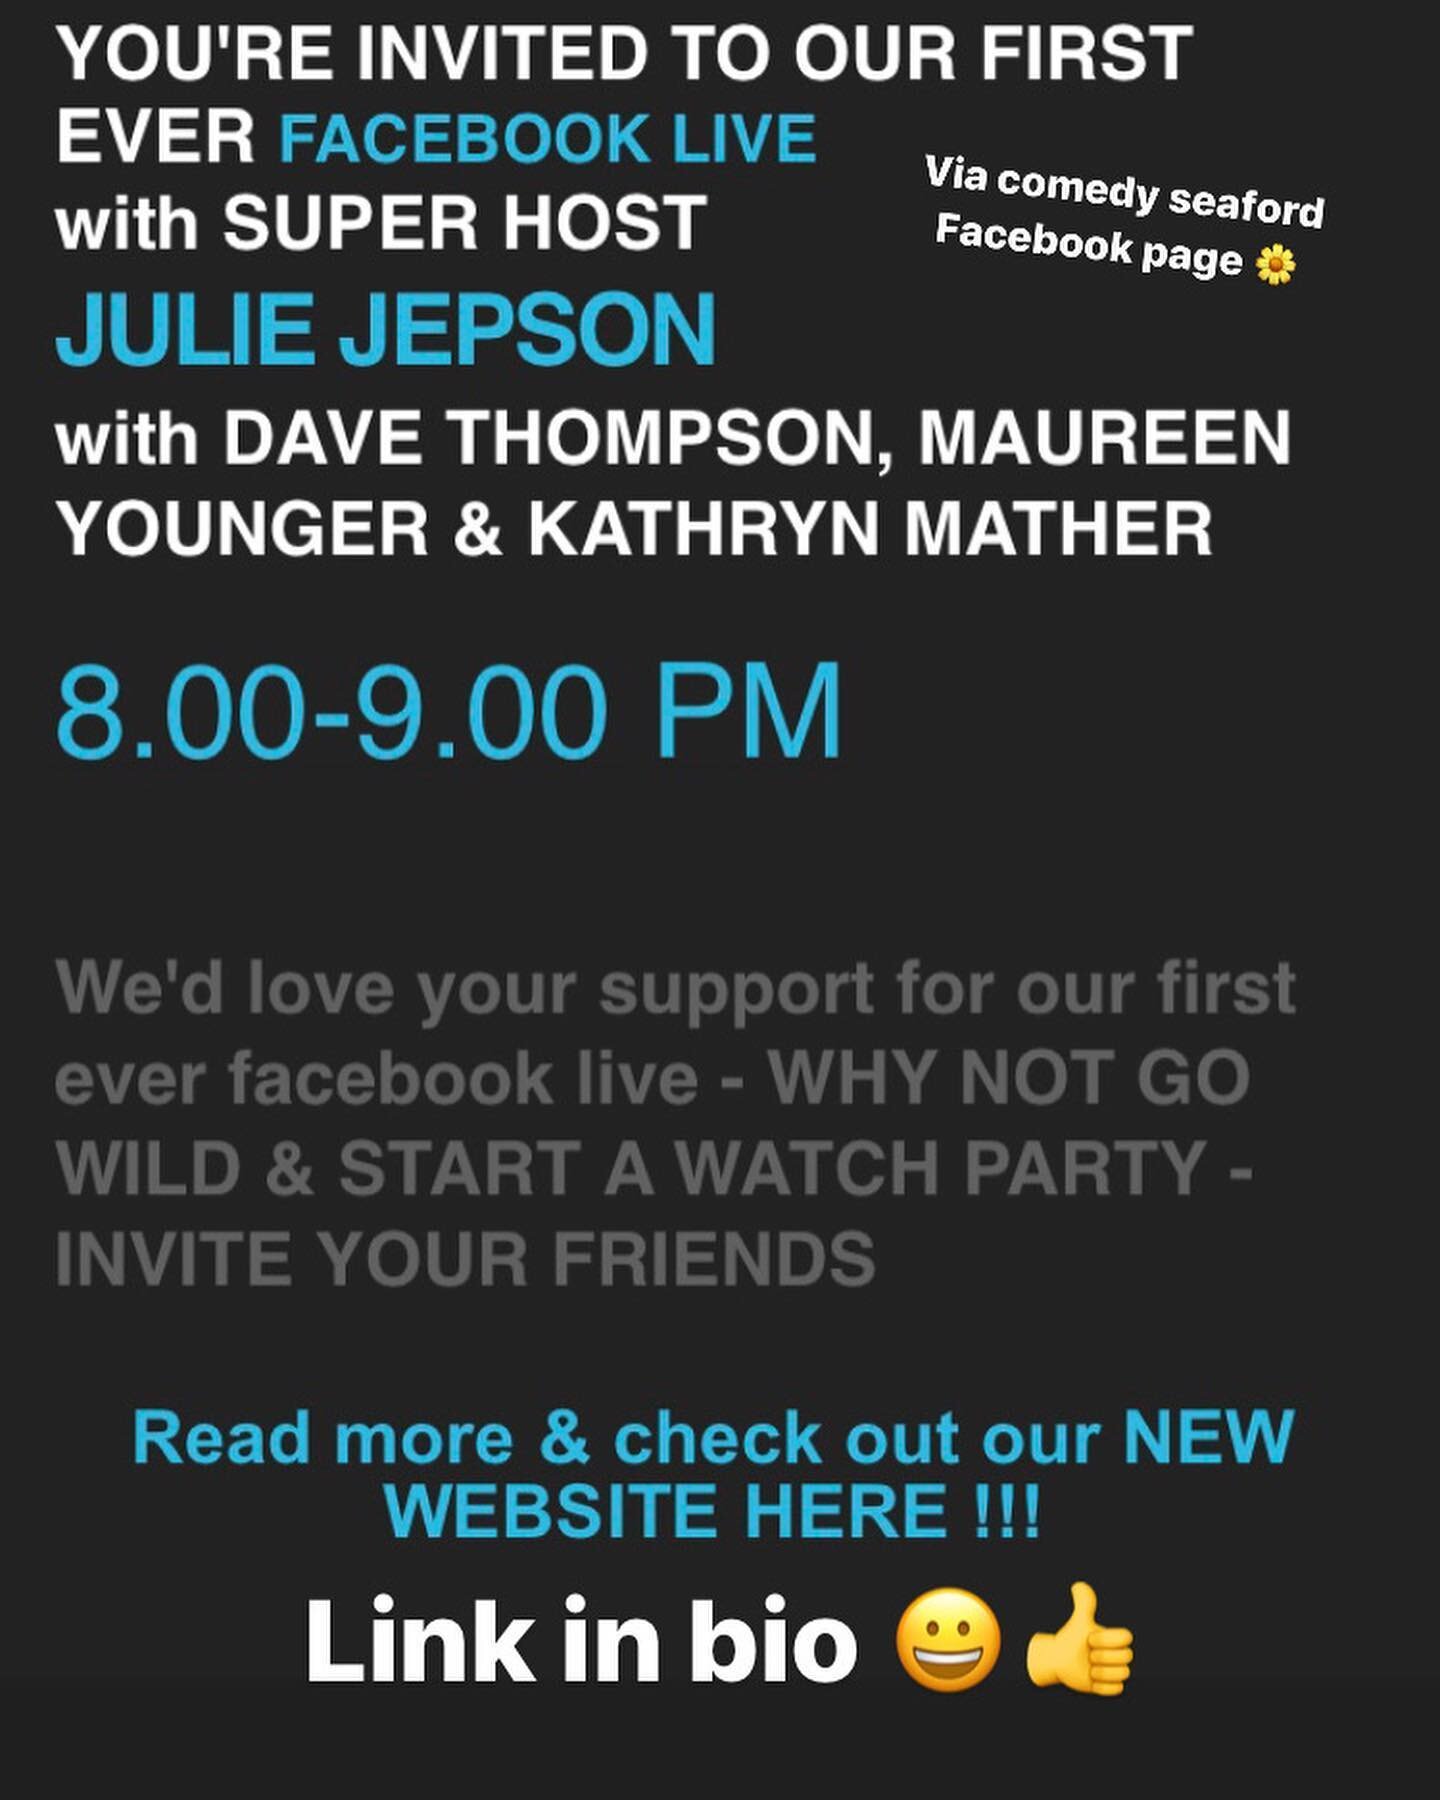 It&rsquo;s TONIGHT FOLKS our first ever fb LIVE hour of comedy! With Dave Thompson, Maureen Younger &amp; Kathryn Mather plus Super Host Julie Jepson.  There could be some surprises - some even planned 🤪 JOIN US via the Comedy Seaford Facebook page 